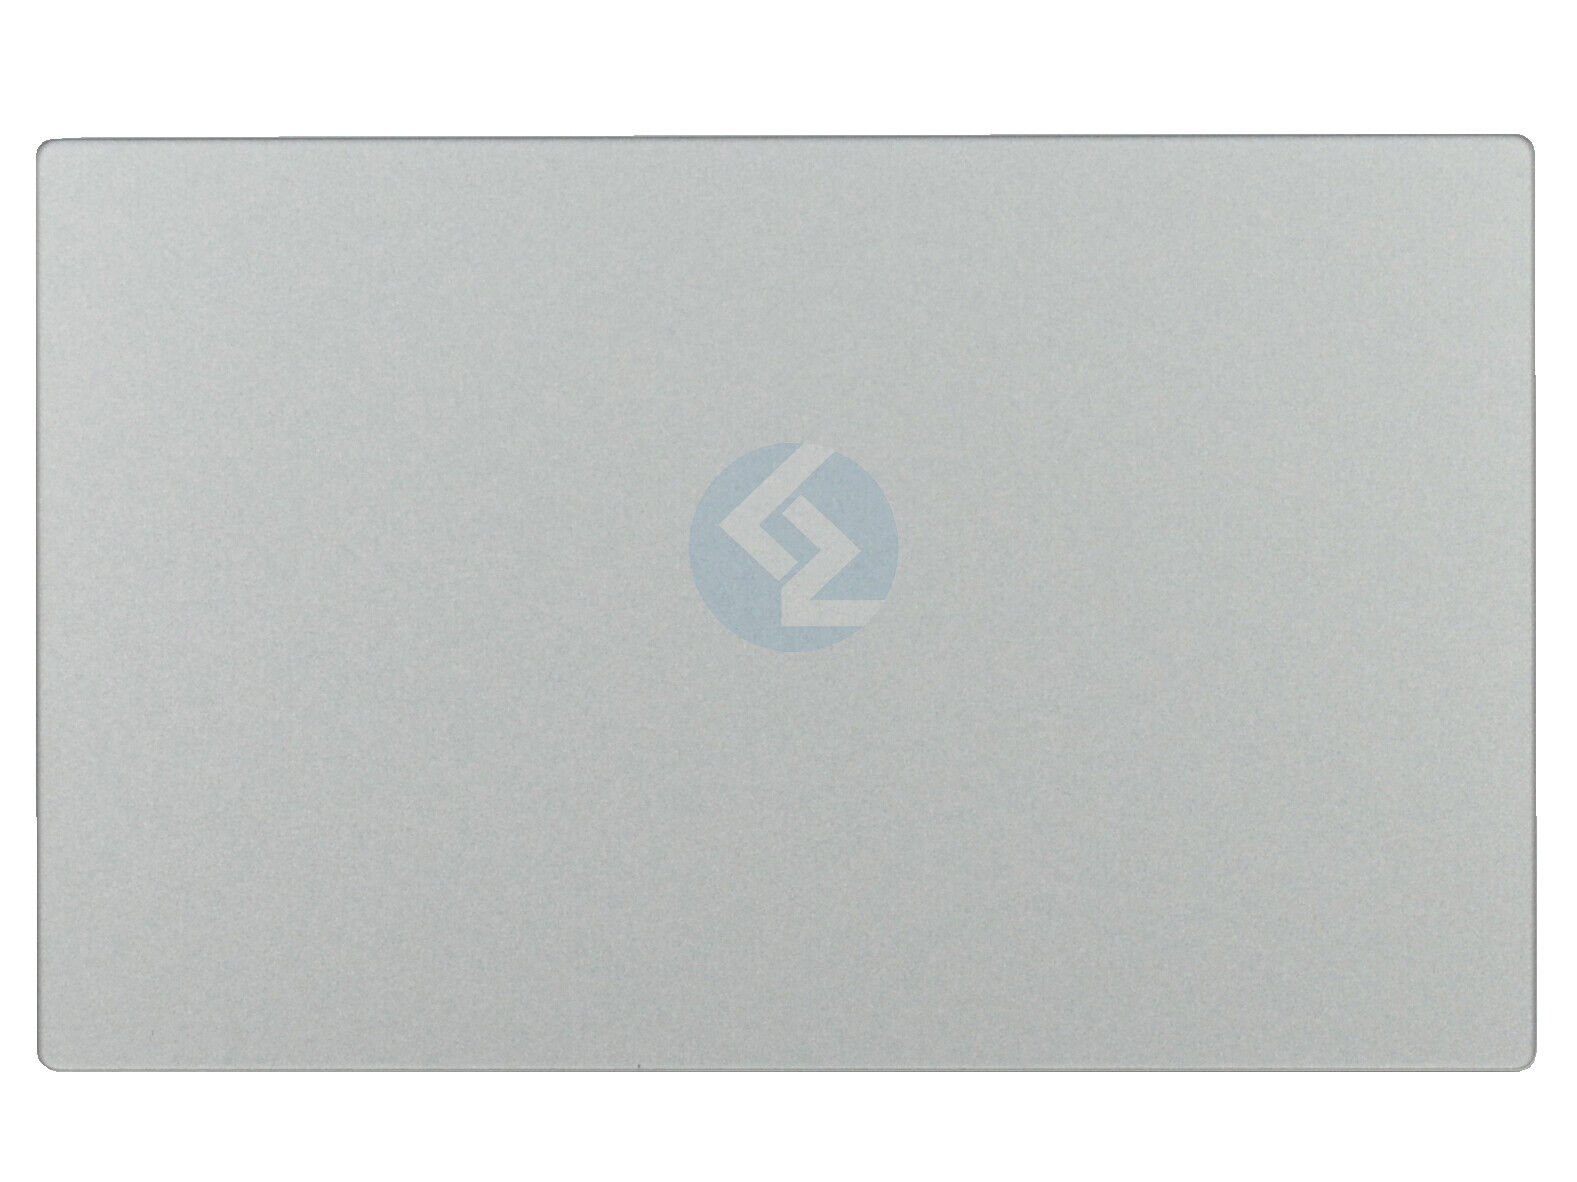 NEW Silver Trackpad Touchpad for Apple Macbook Air Retina 13